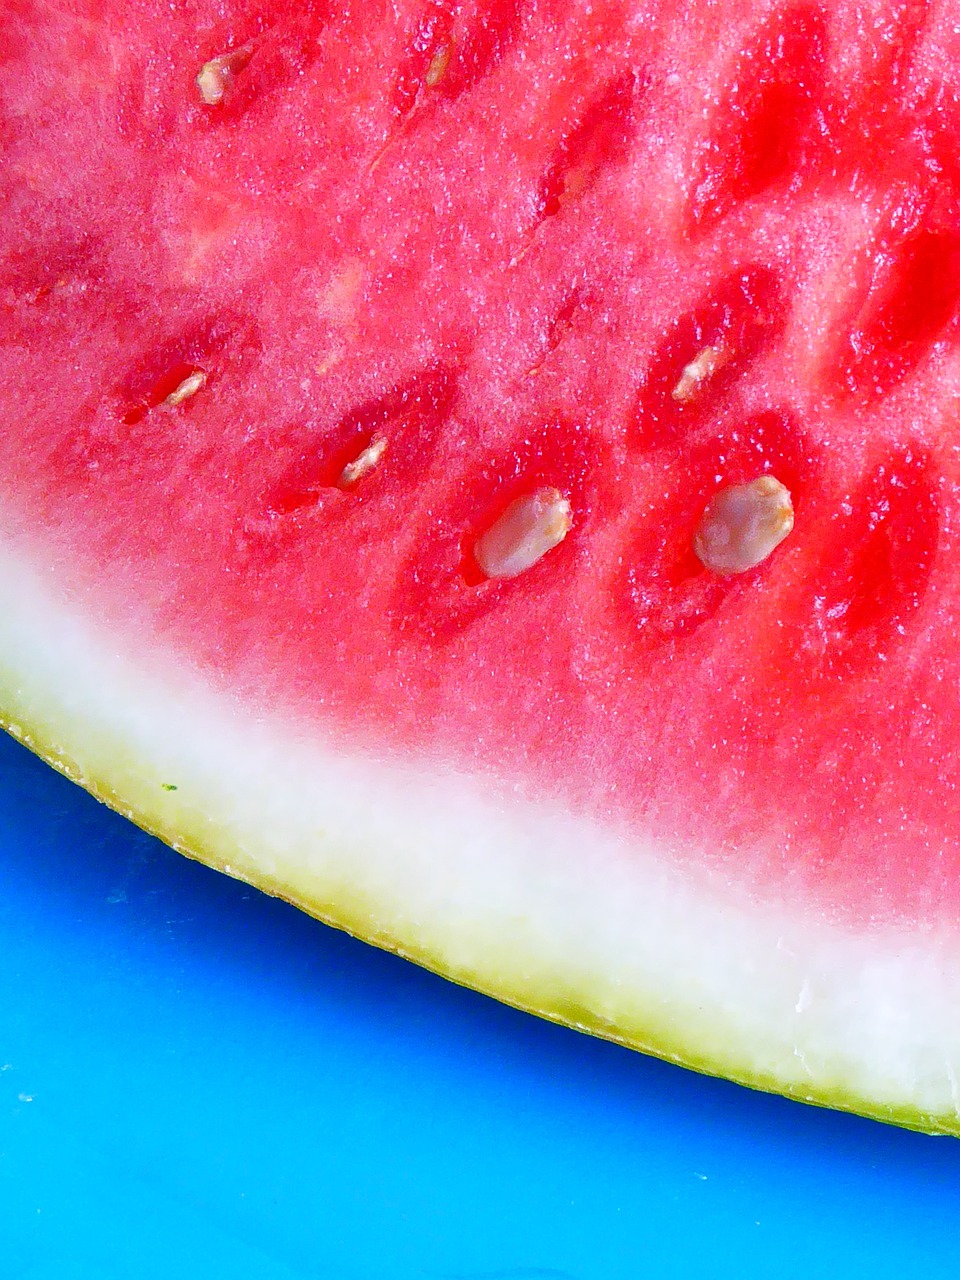 watermelon red pulp free photo